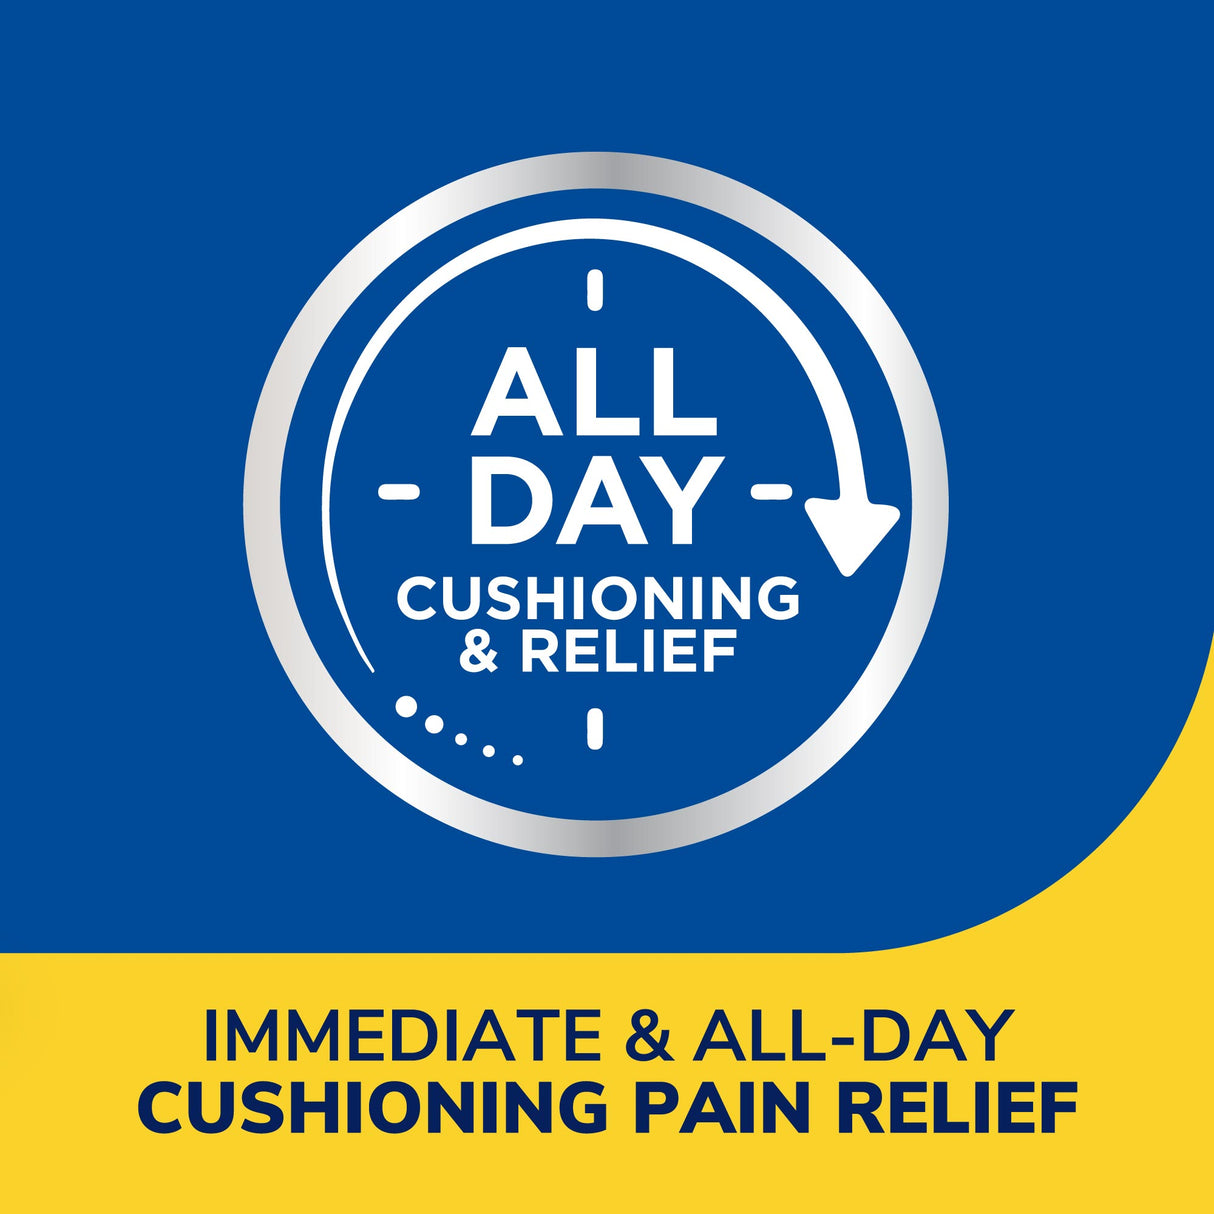 image of all day cushioning relief